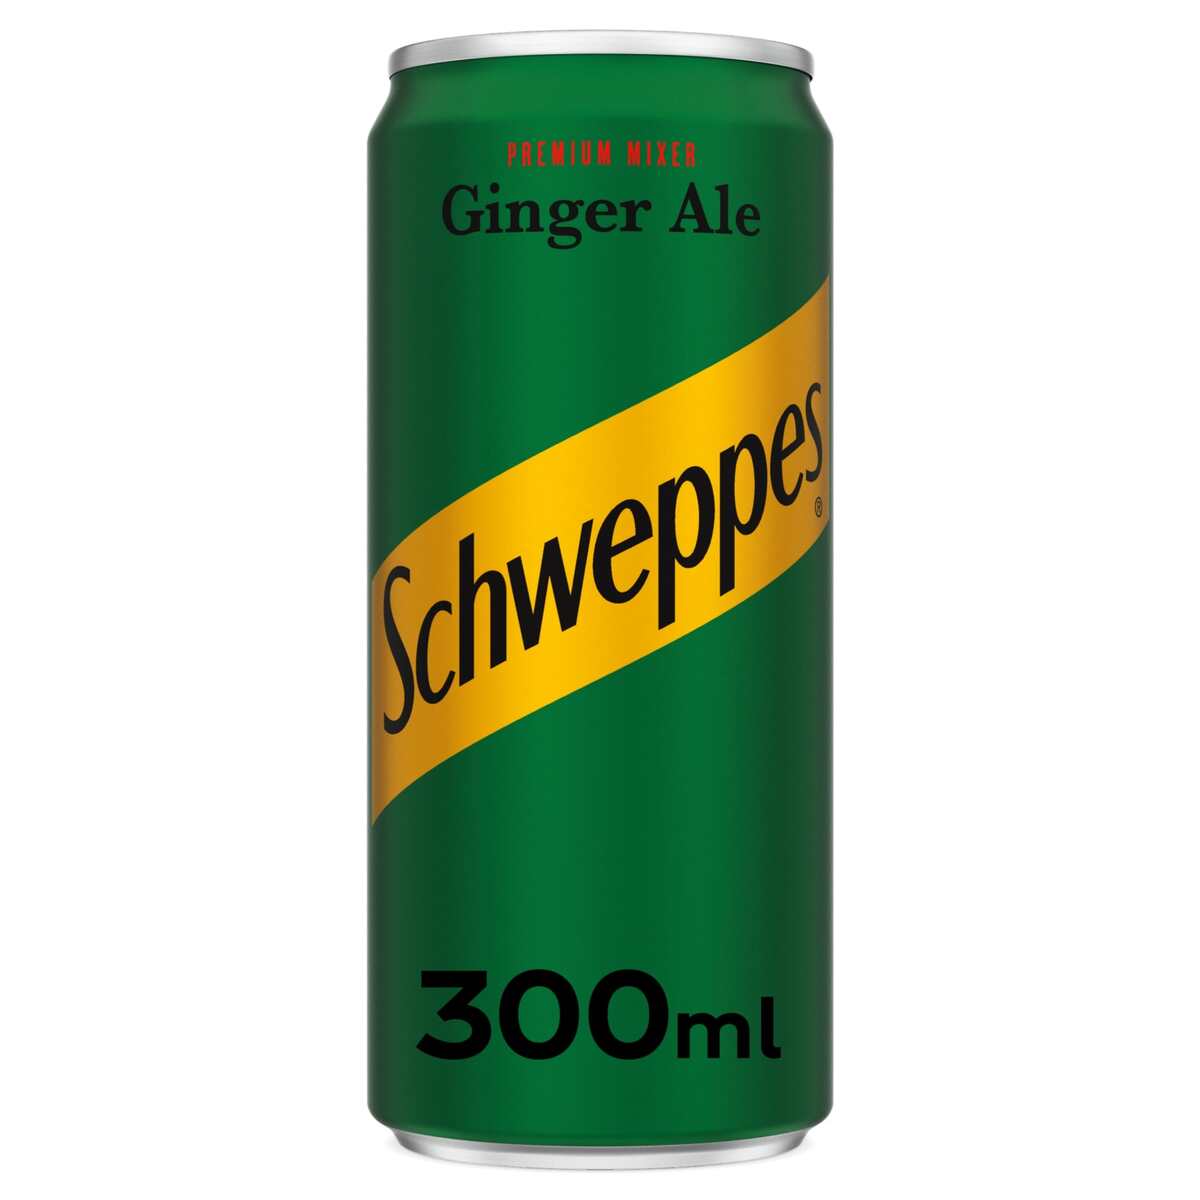 Schweppers Ginger Ale 300 ml